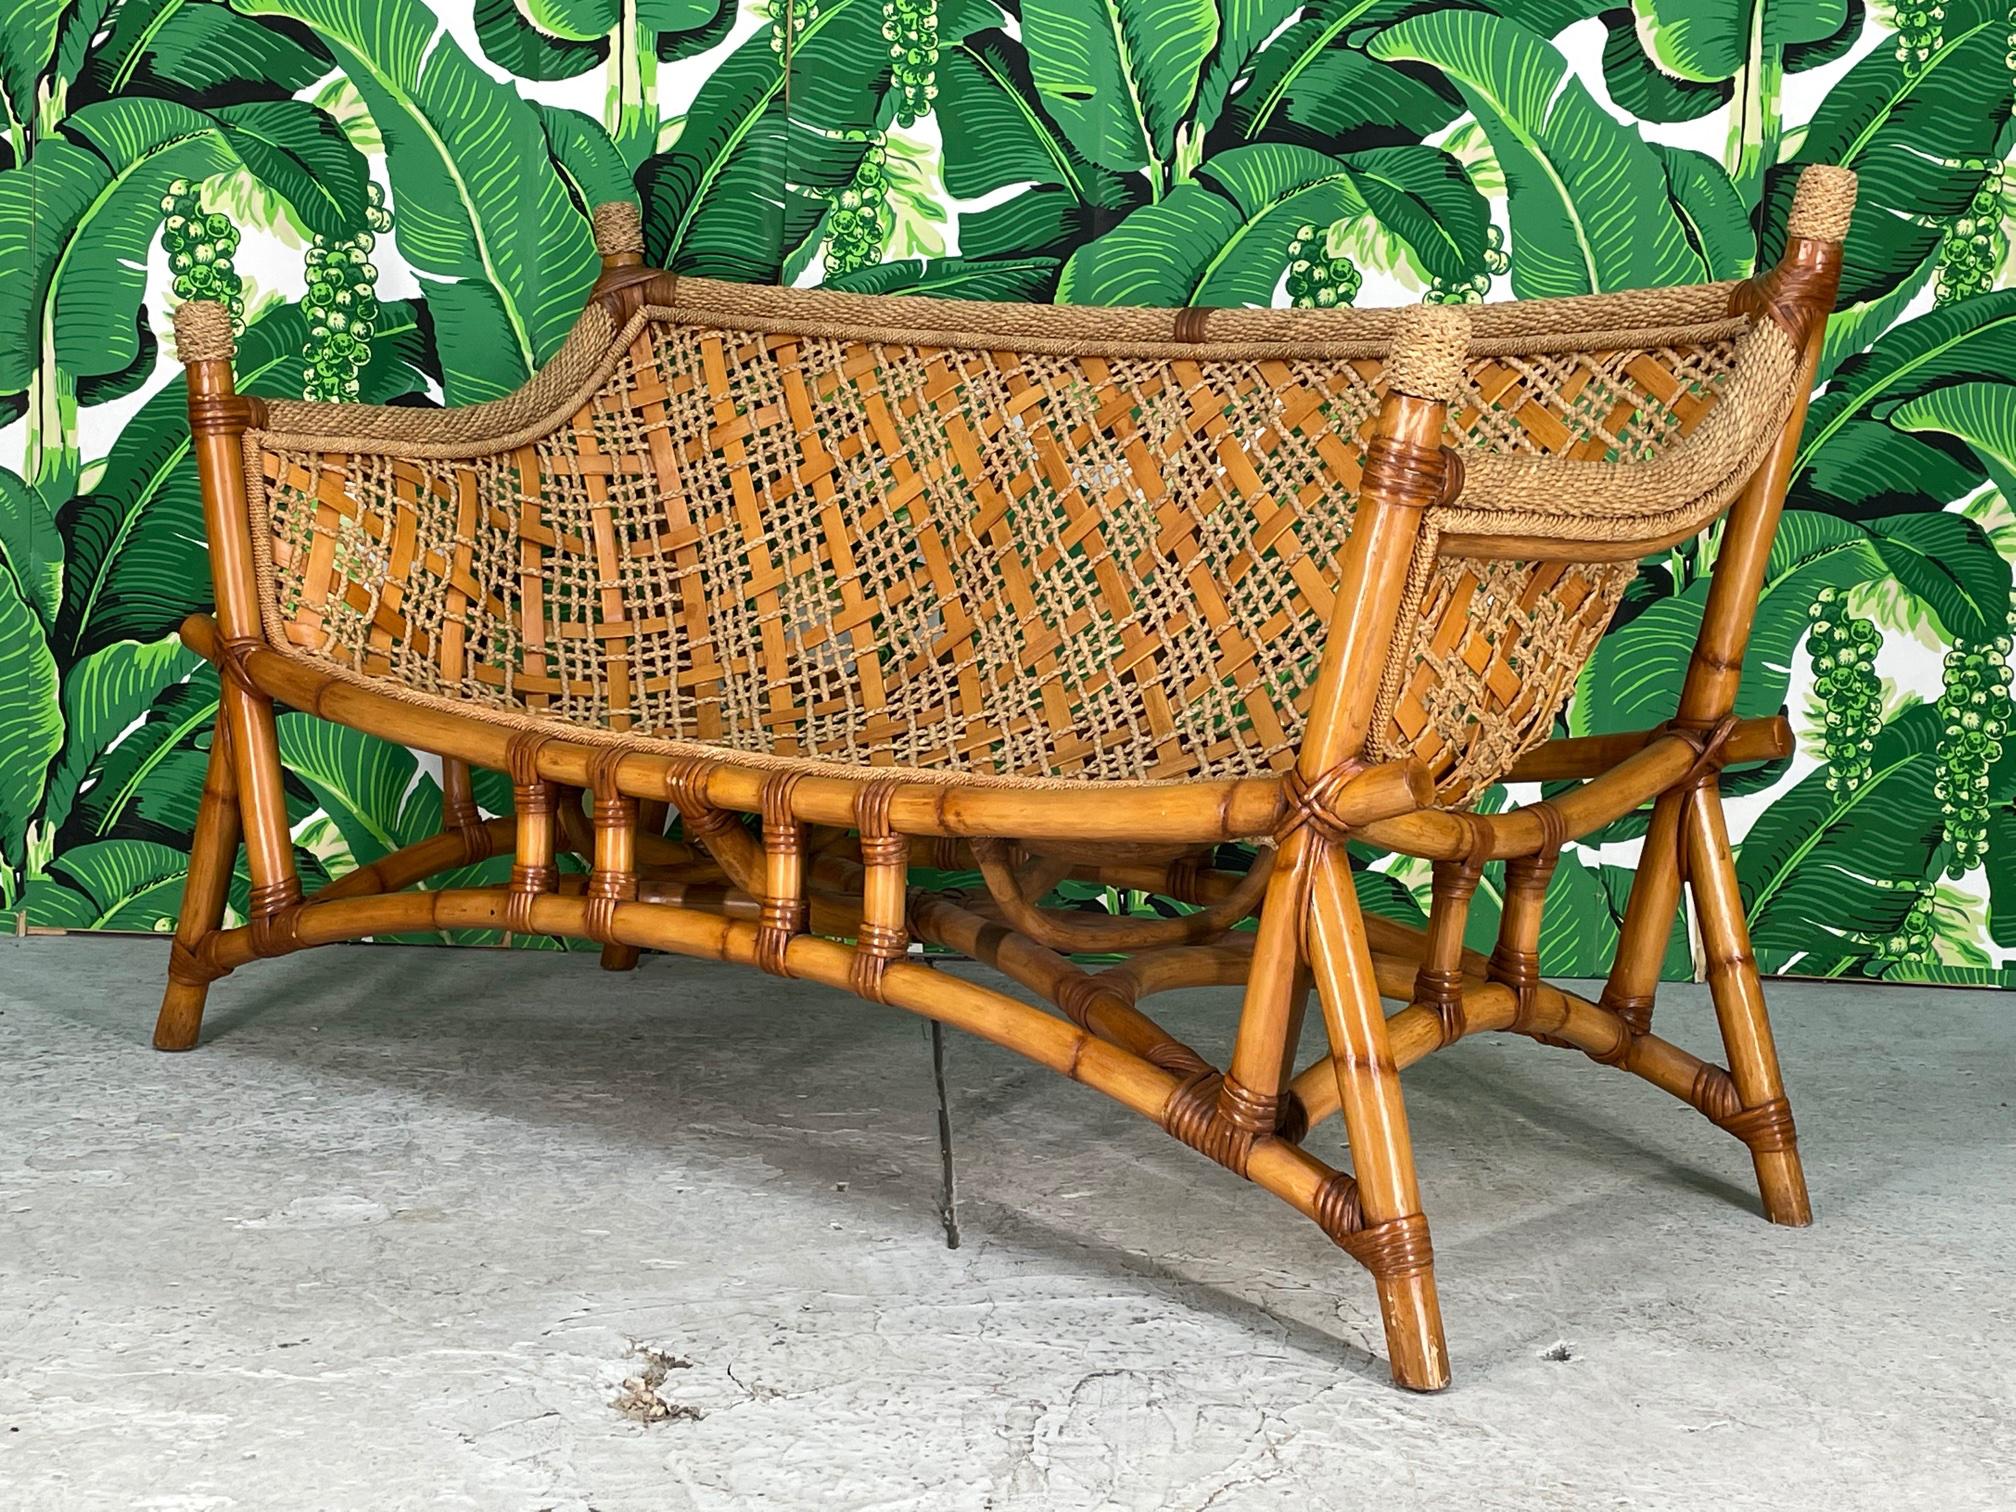 Unique vintage rattan bench sofa features a sling seat design and woven rope and reed detailing. Chinoiserie influence with it's pagoda style base and flared legs. Good condition with imperfections consistent with age, see photos for condition